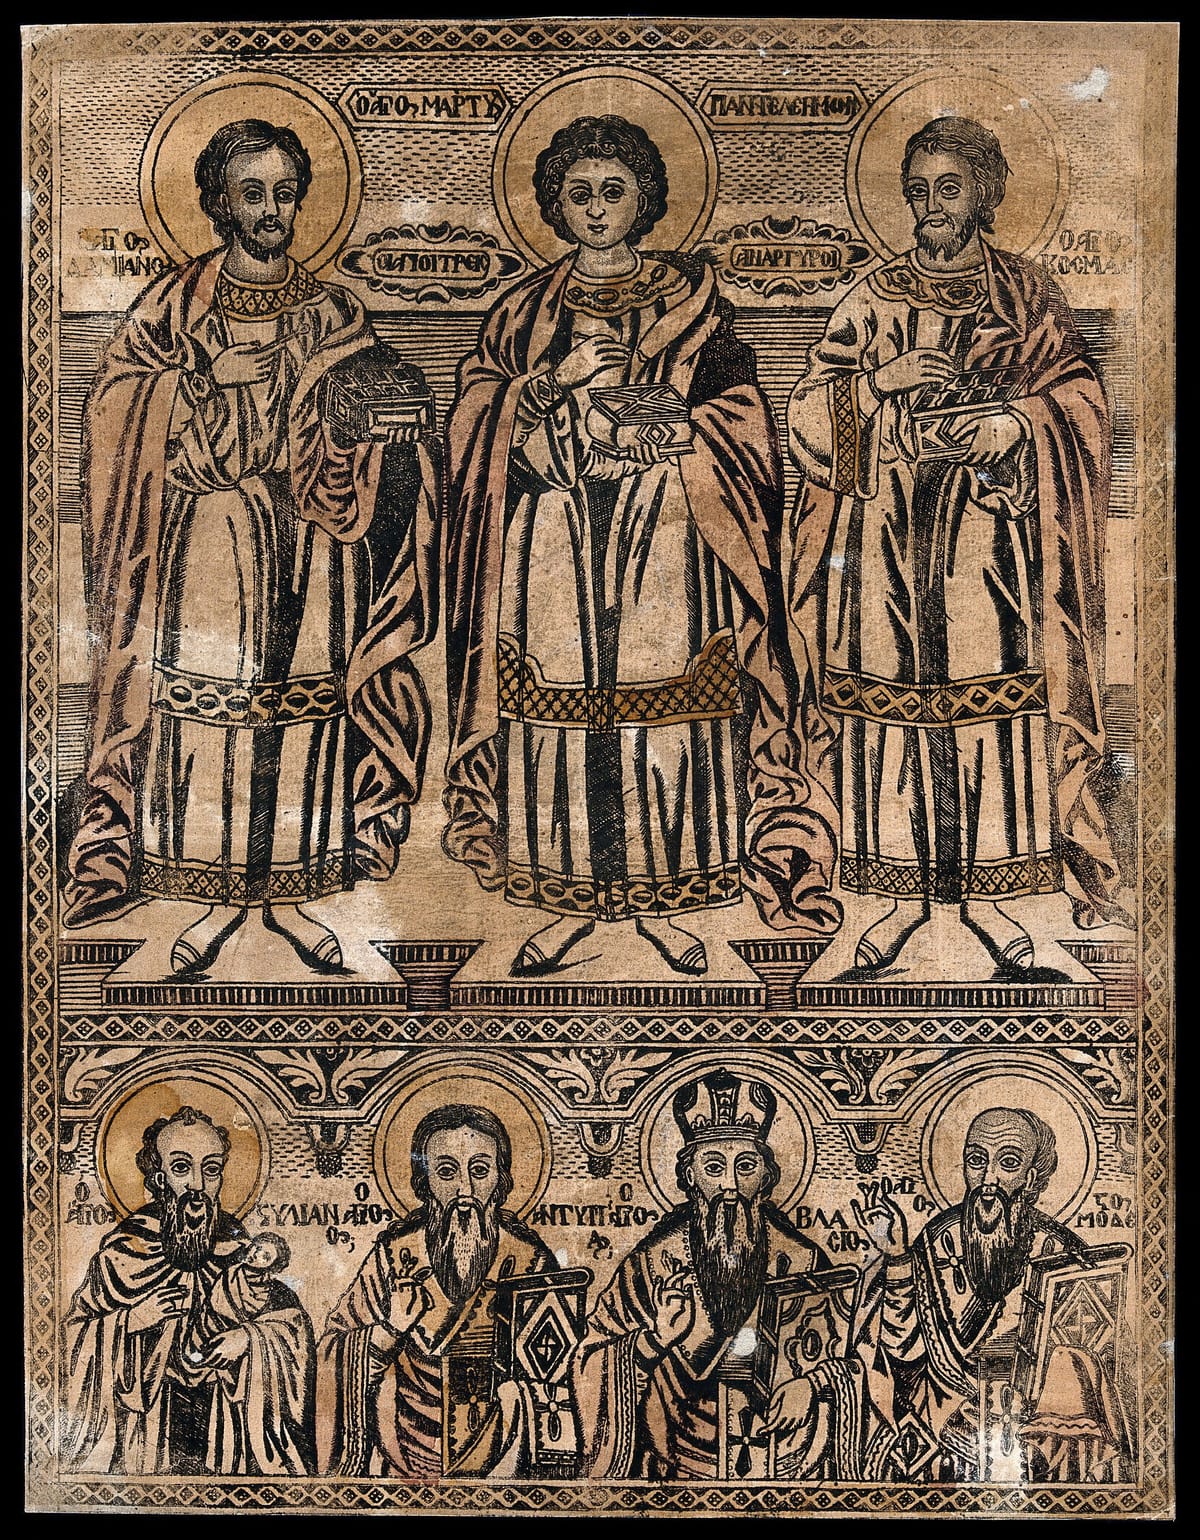 Saint Damian, Saint Pantaleon and Saint Cosmas with four other saints below (unknown date and author) - Public Domain Byzantine Drawing